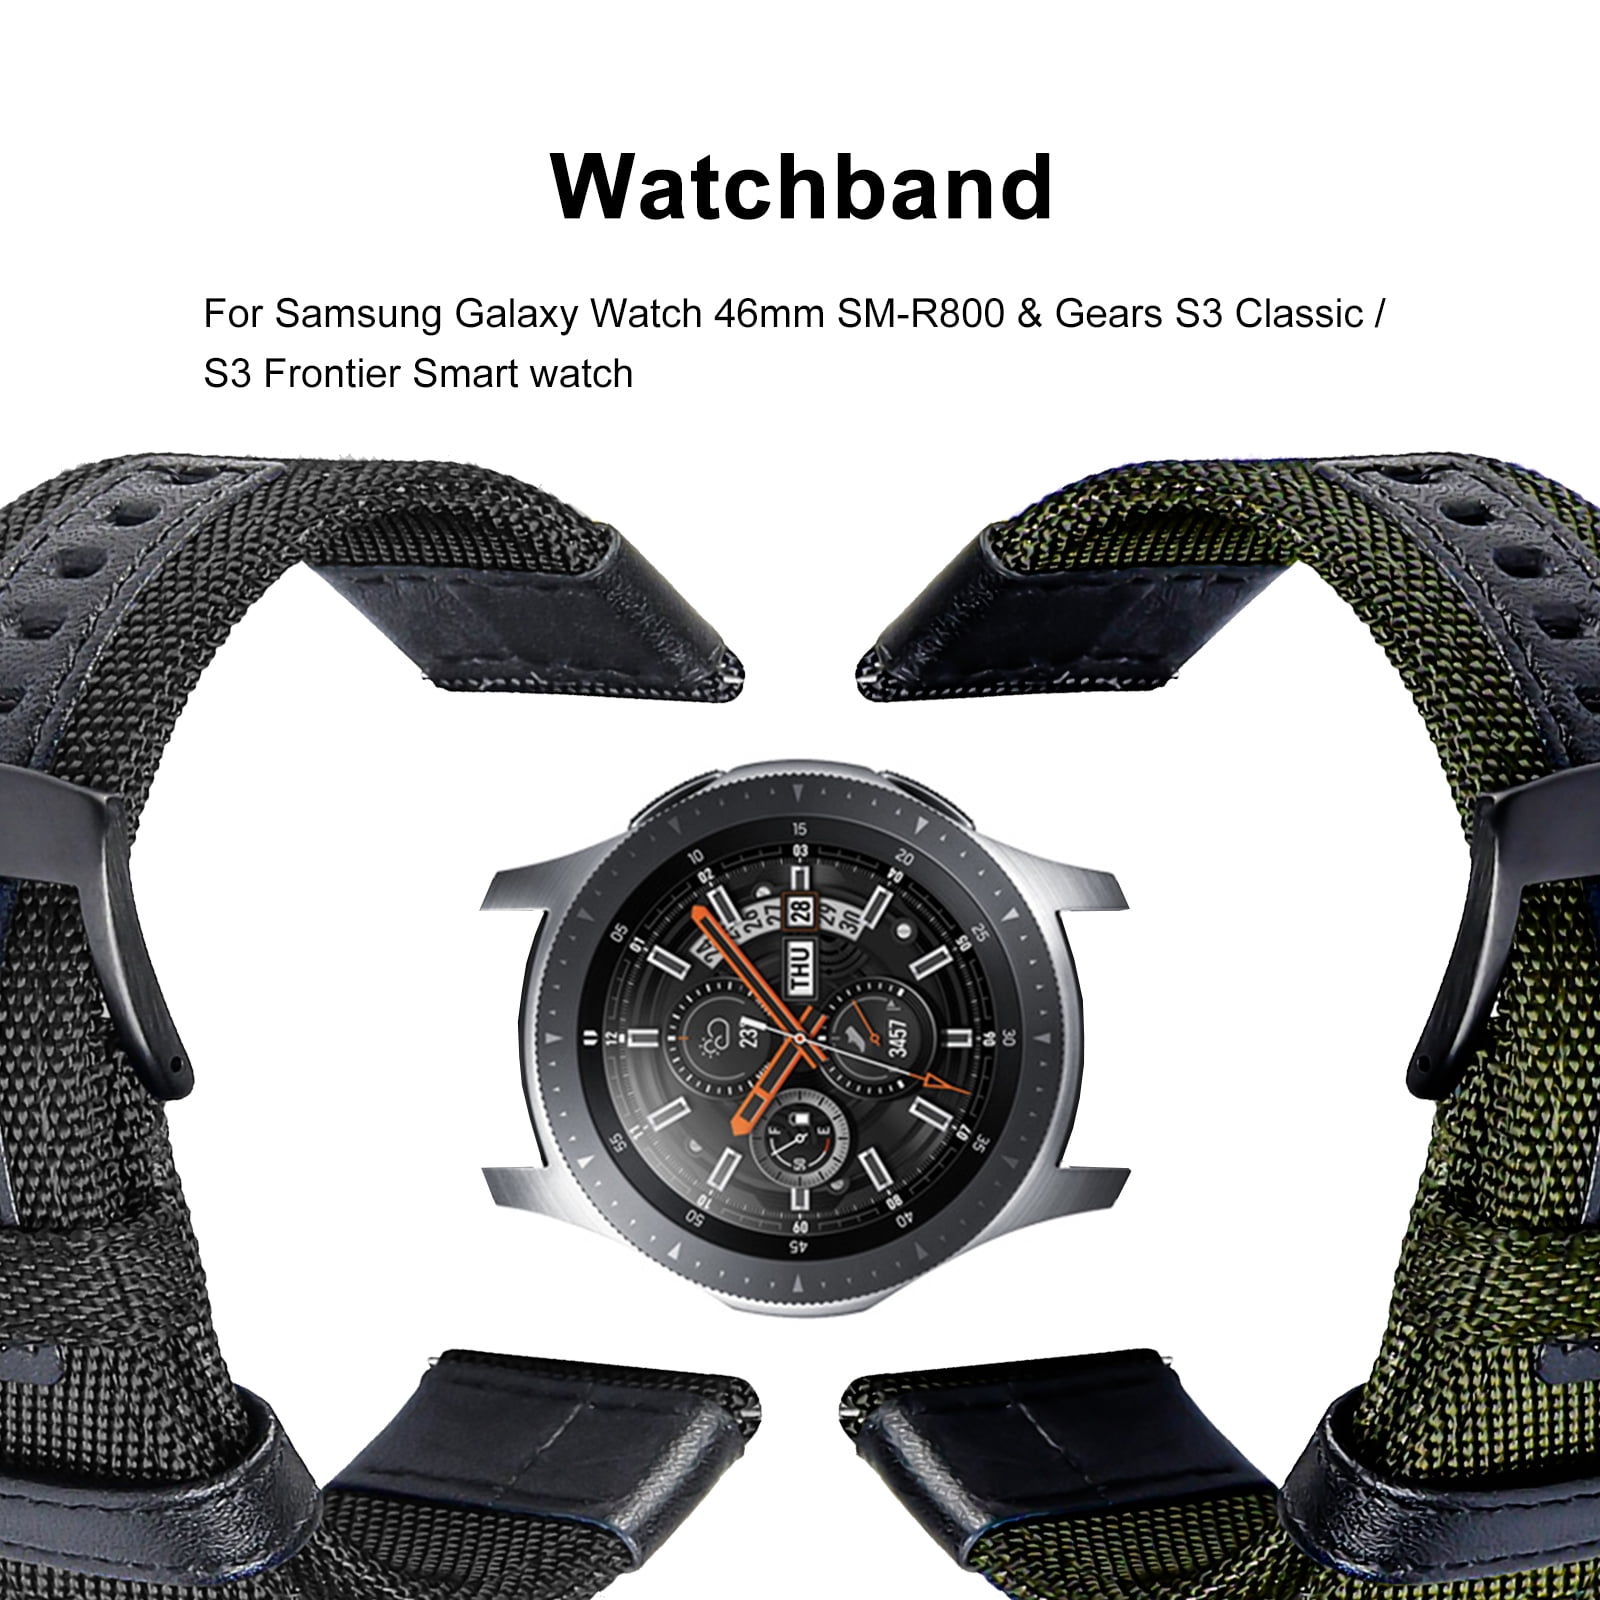 22mm Luxury Leather Nylon Watch Band Strap For Samsung Gear S3 Classic  Frontier